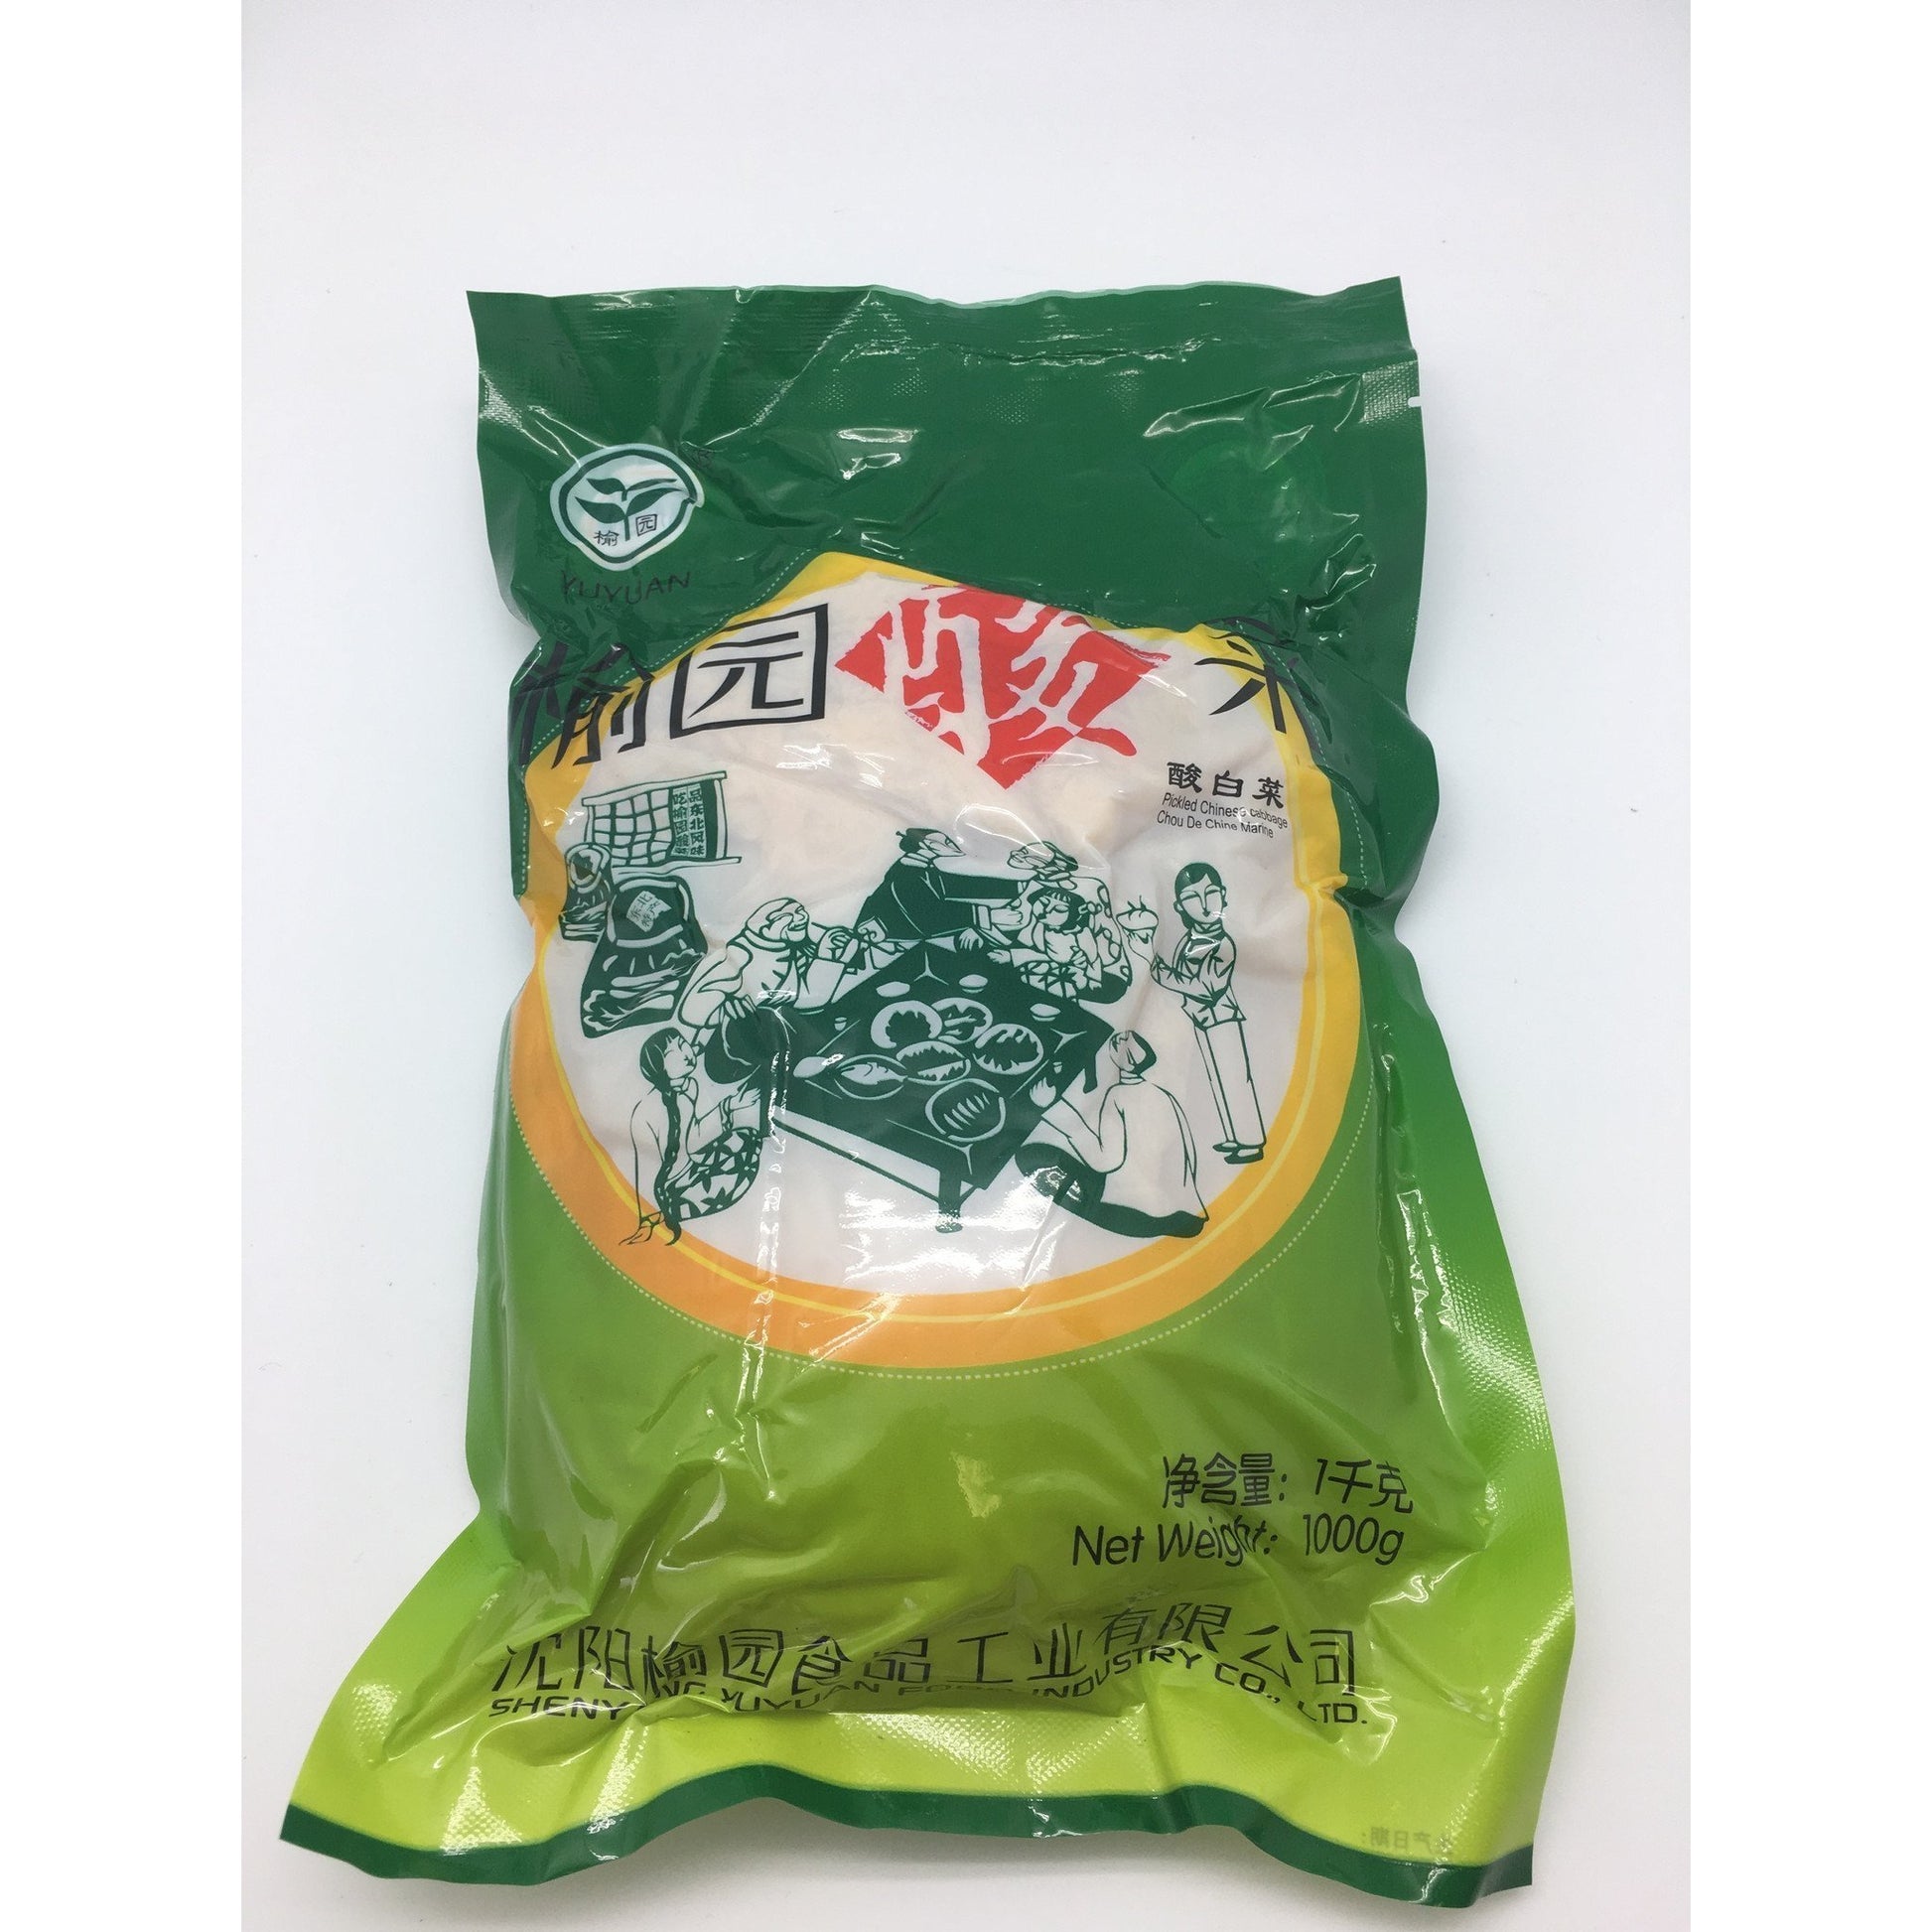 D138YK Yu Yuan Brand - Pickled Chinese Cabbages 1kg - 10 bags / 1CTN - New Eastland Pty Ltd - Asian food wholesalers